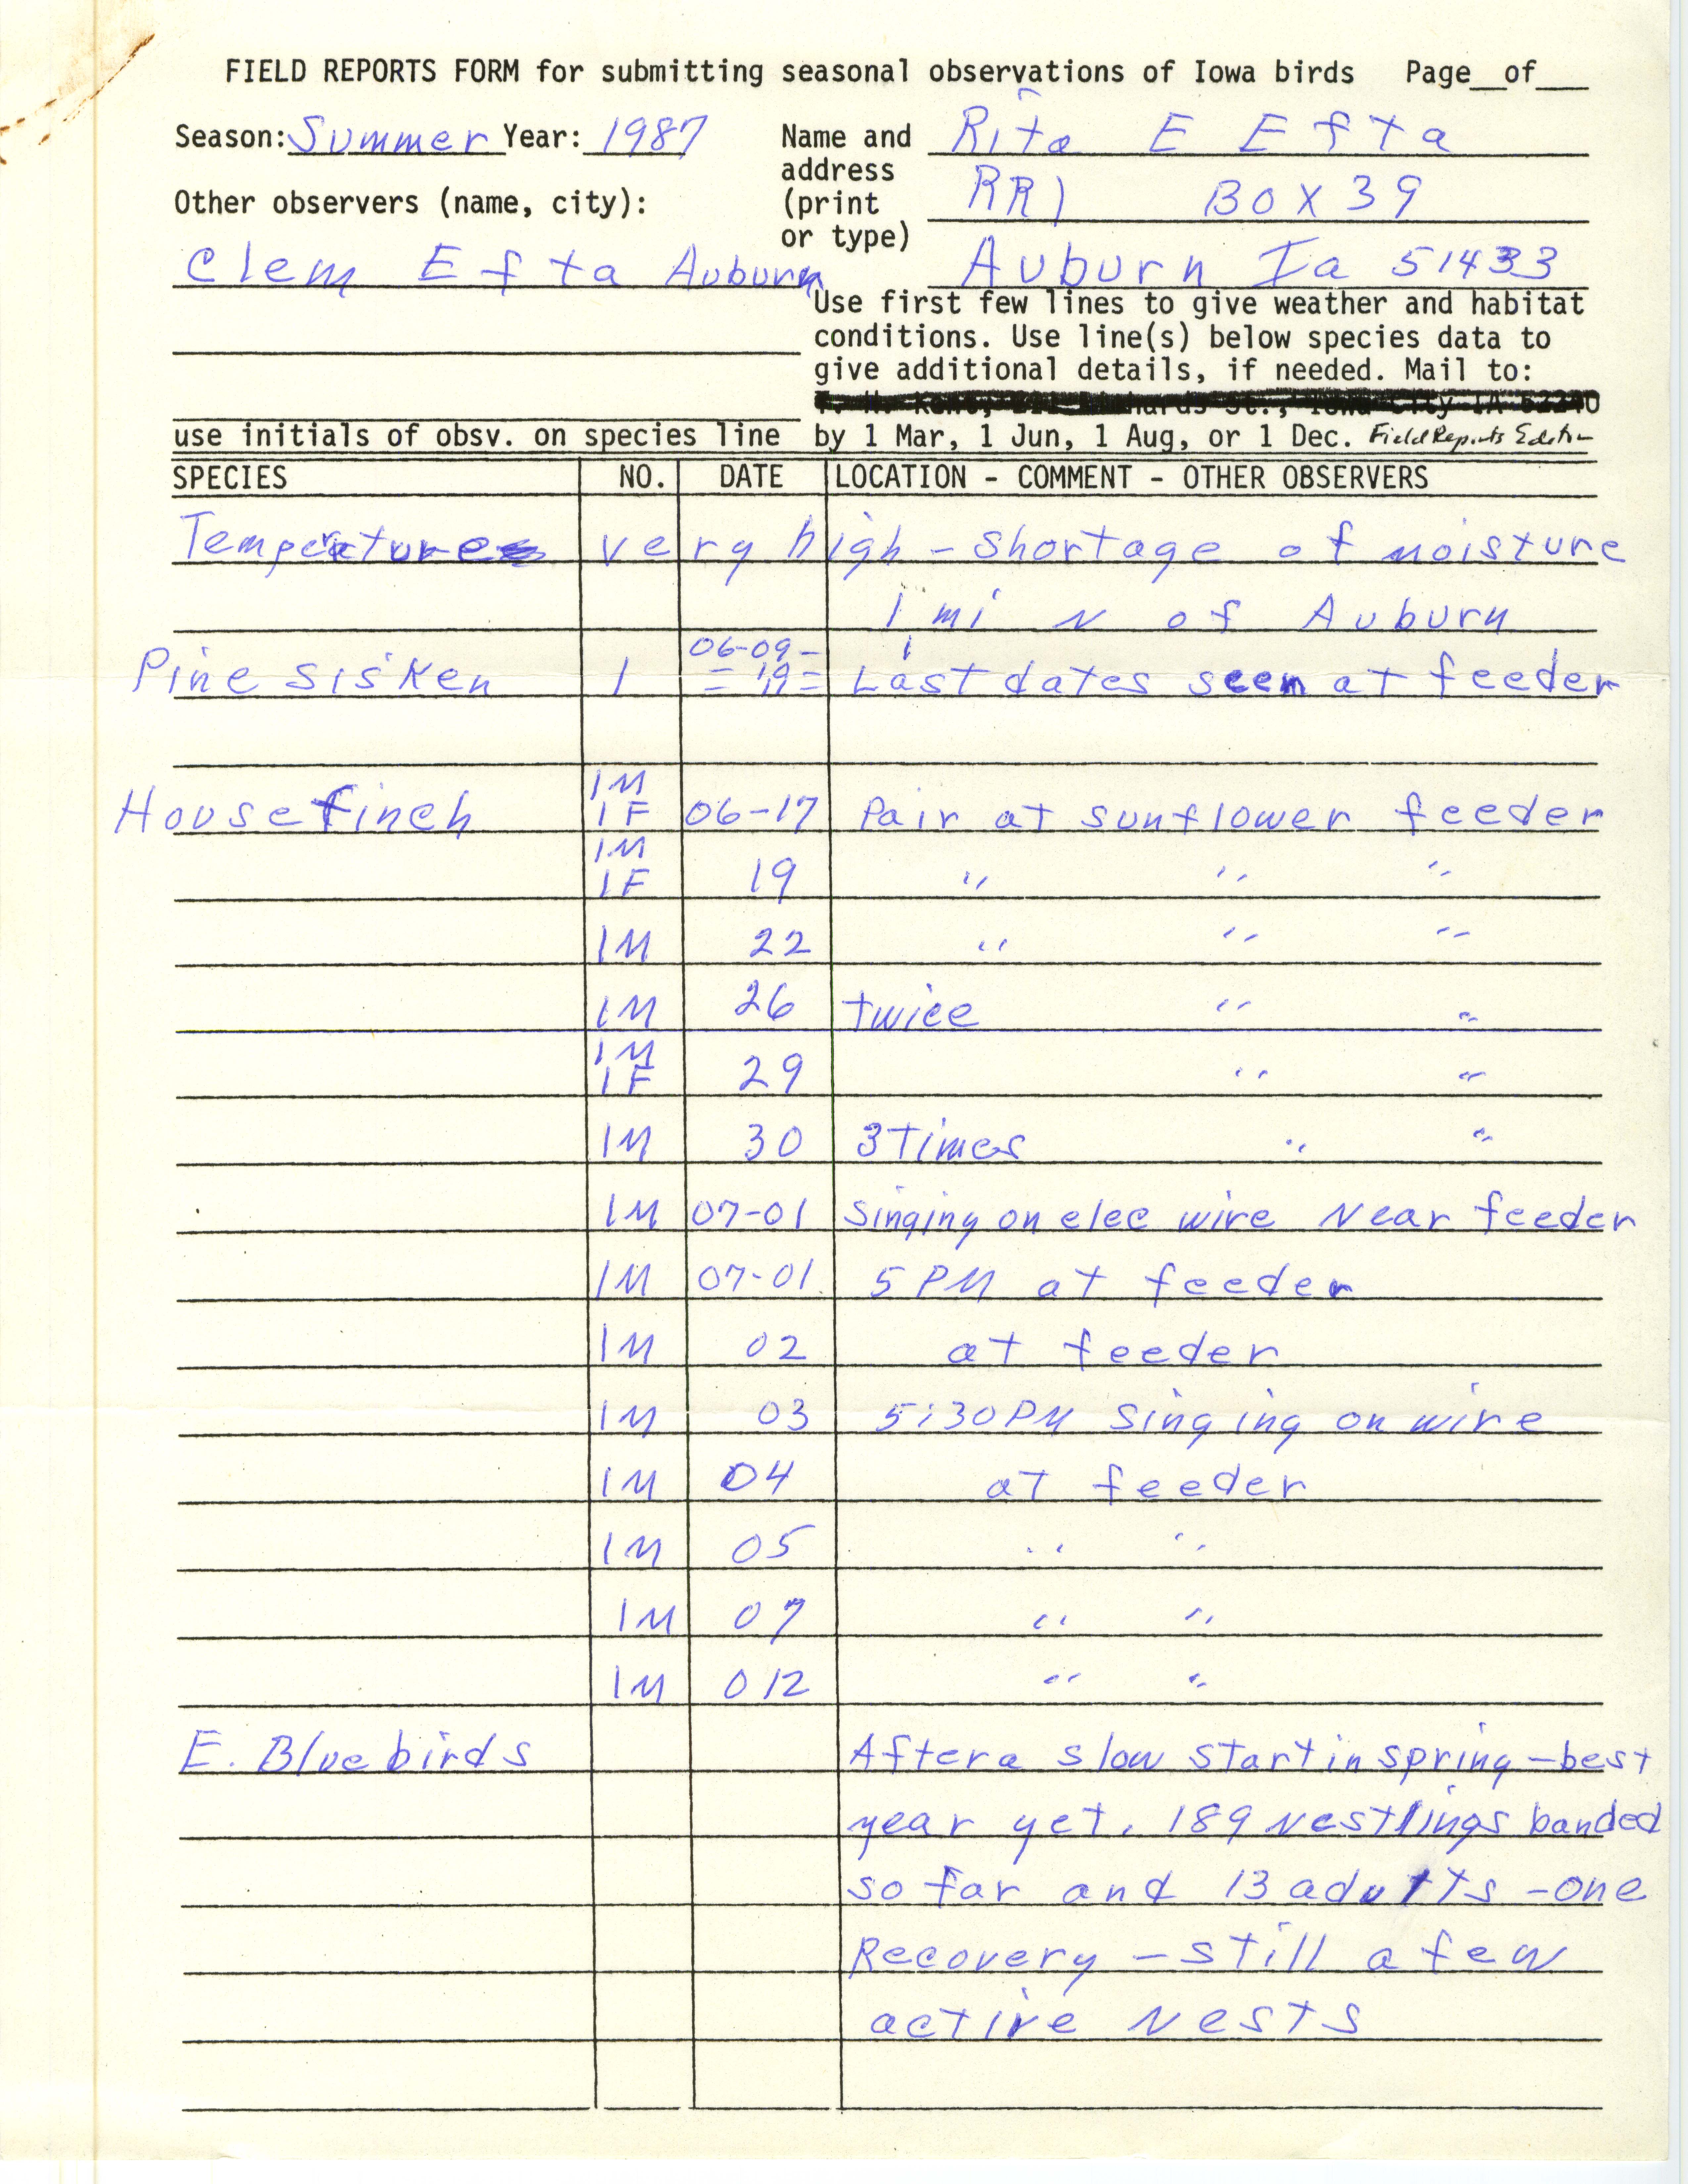 Field reports form for submitting seasonal observations of Iowa birds, Rita E. Efta, summer 1987